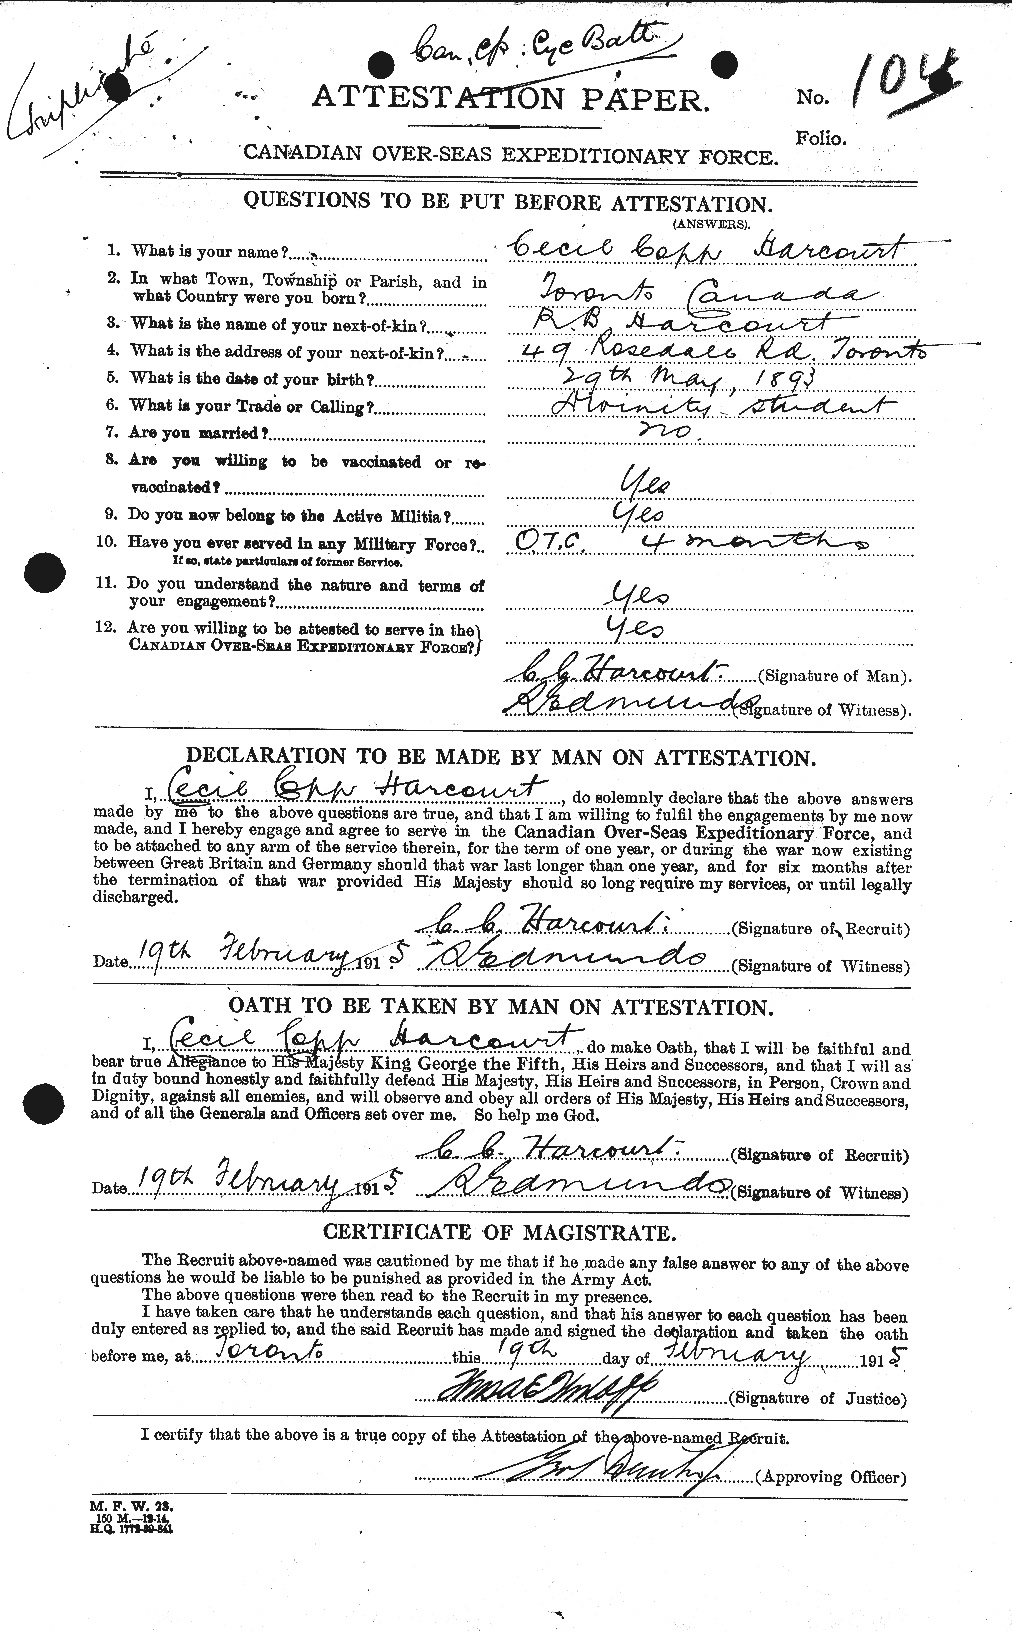 Personnel Records of the First World War - CEF 376202a